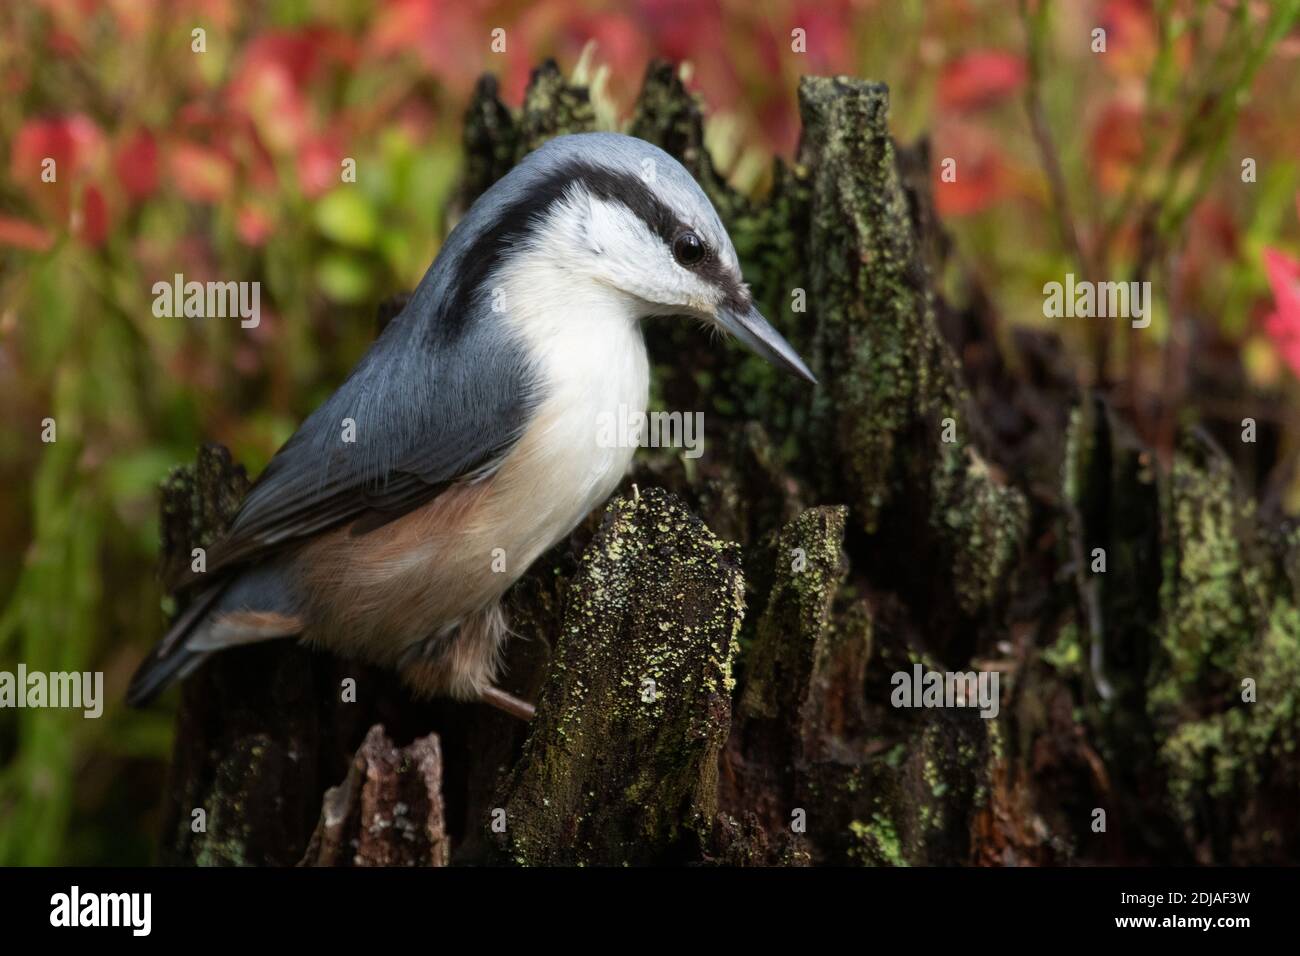 A close-up of an Eurasian nuthatch, Sitta europaea standing on a stump in boreal forest. Stock Photo